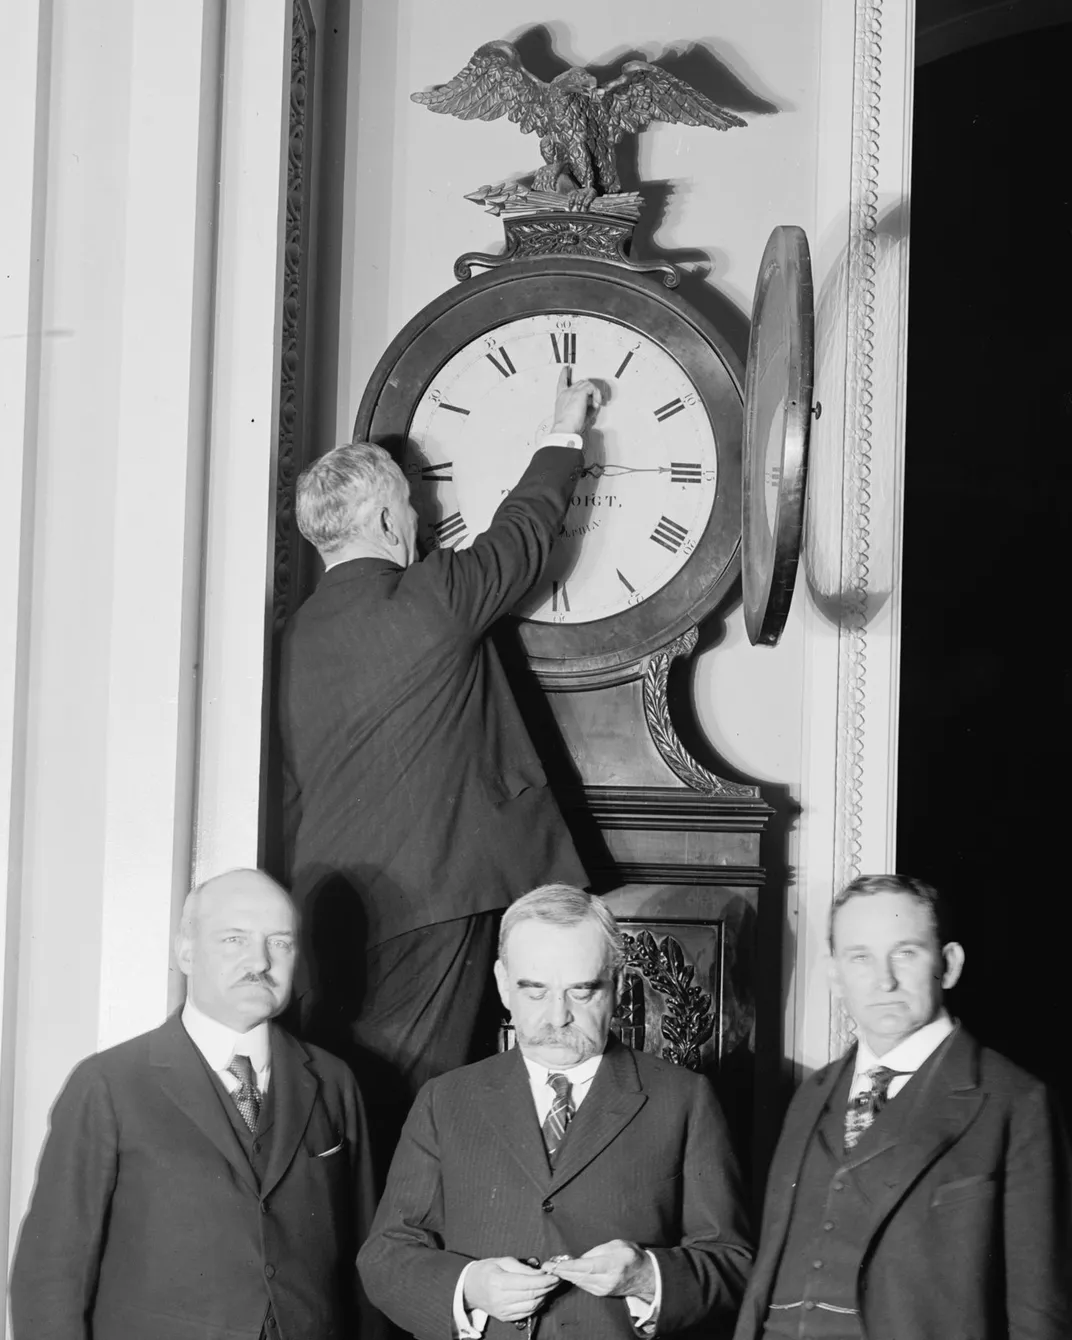 Senate Sergeant at Arms Charles Higgins turns the Ohio Clock in the U.S. Capitol forward for the country's first daylight saving time on March 31, 1918.